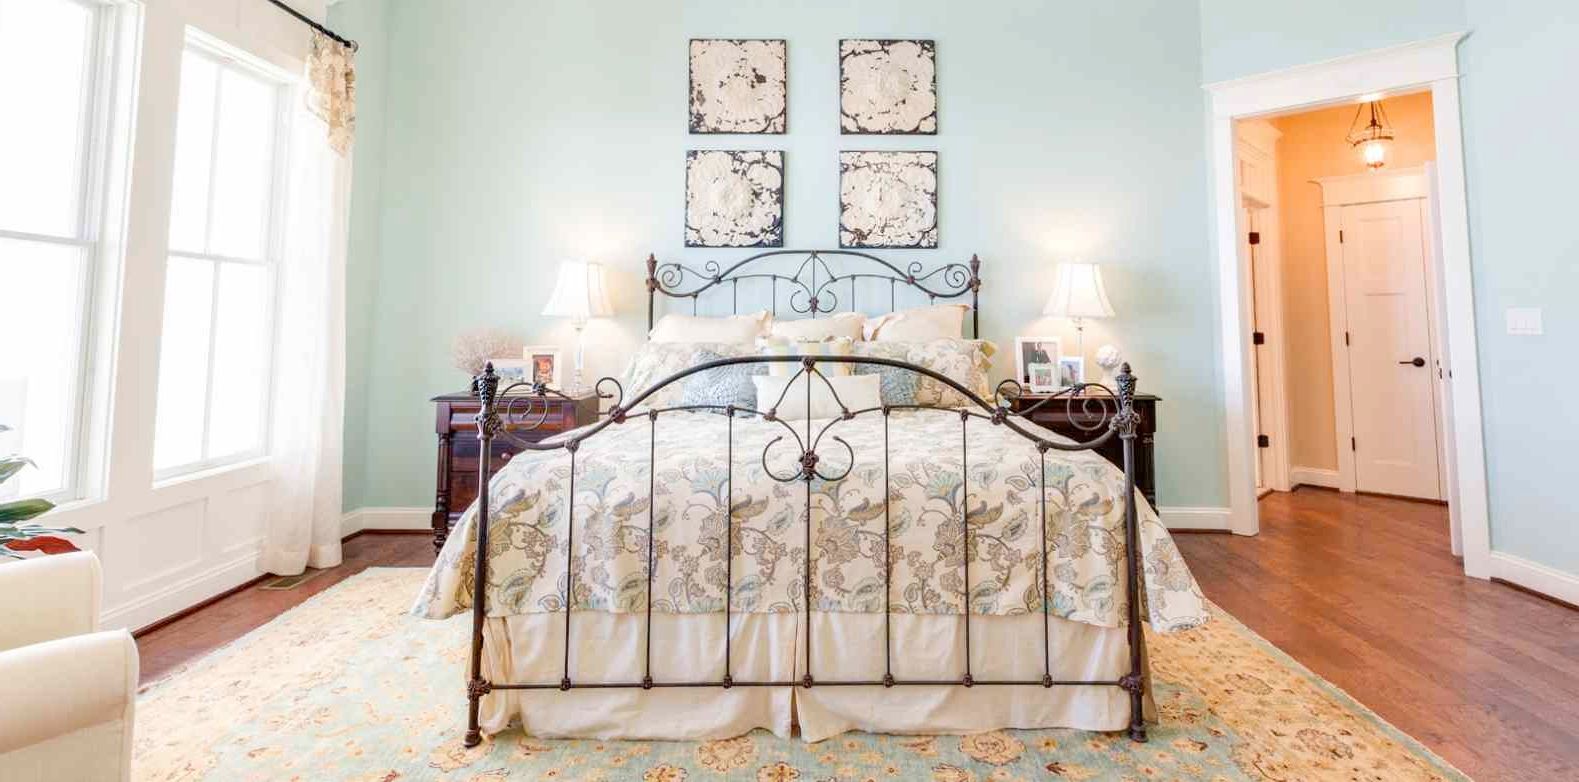 Wrought Iron Panel Bed Design Also Exquisite Teenage Girl Bedroom With Blue Painted Wall Idea And Embroidered Area Rug (Photo 2651 of 7825)